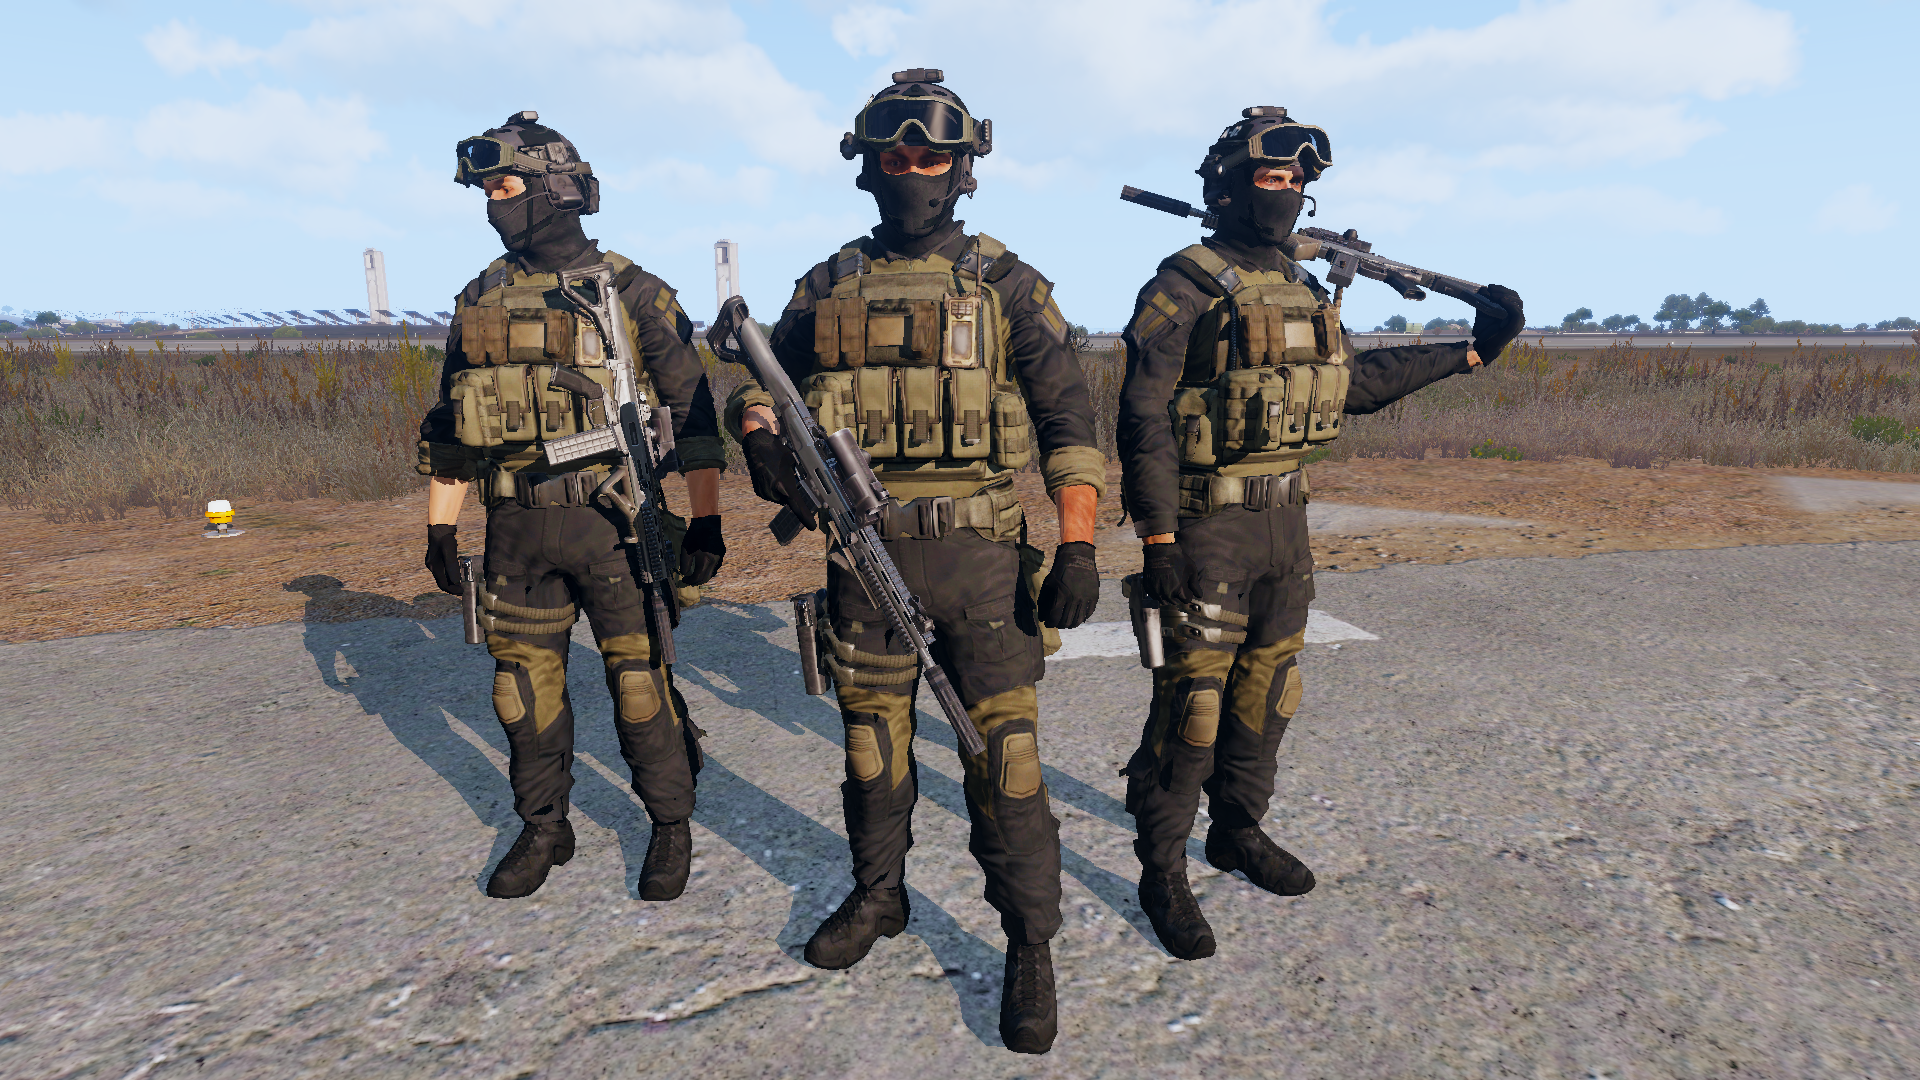 Decided to try remaking the Shadow Company from MW2